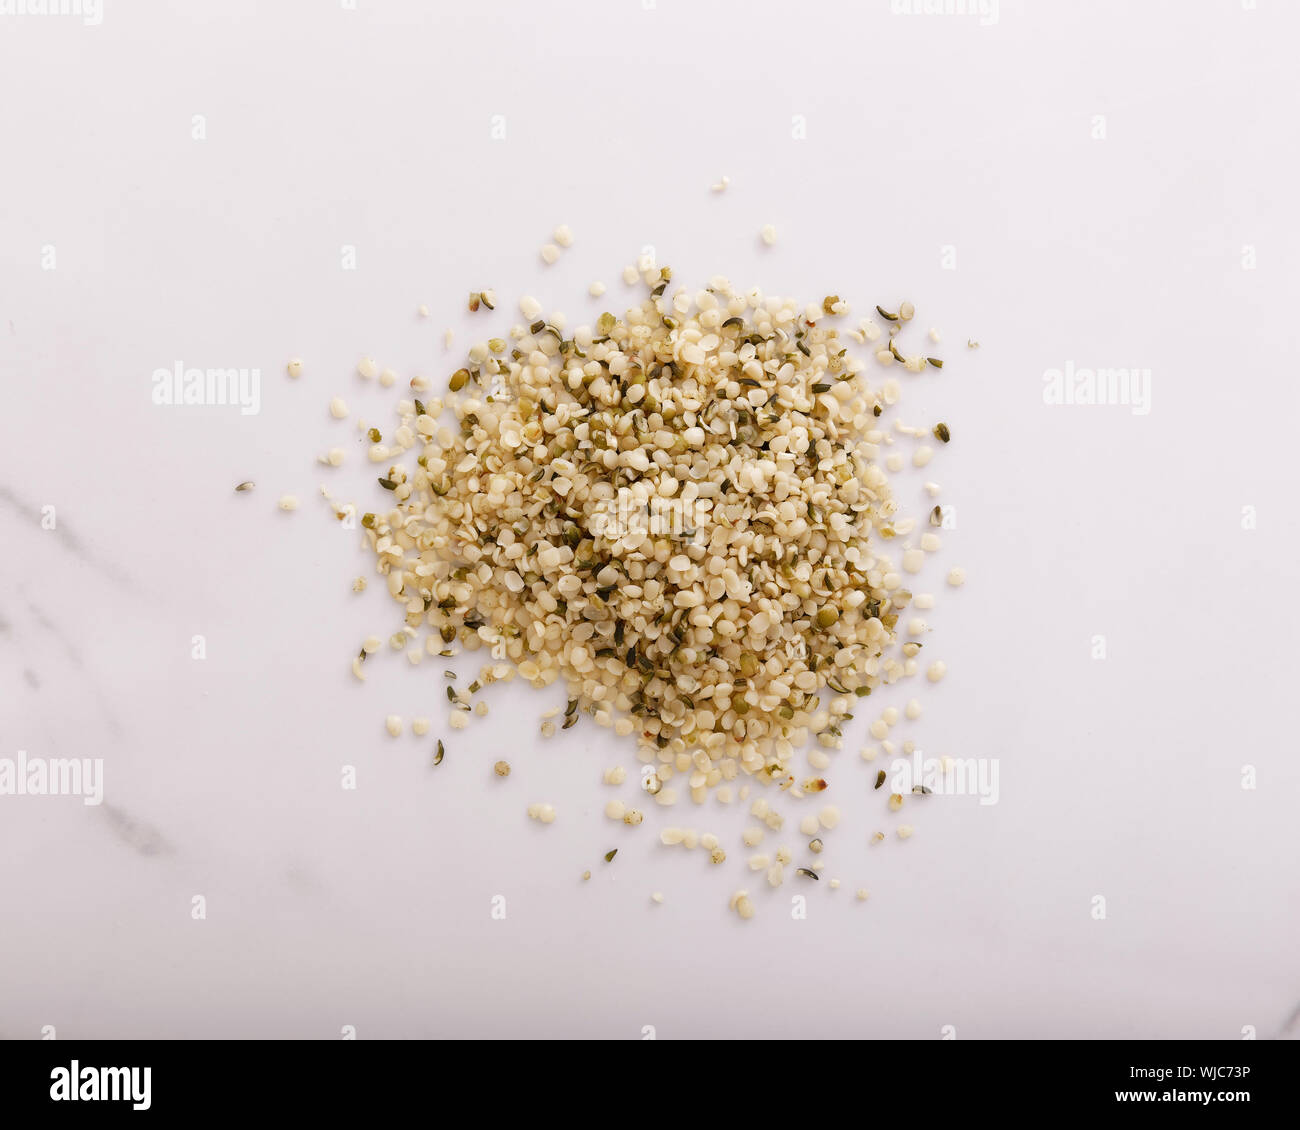 Hemp seeds piled and seen from above Stock Photo